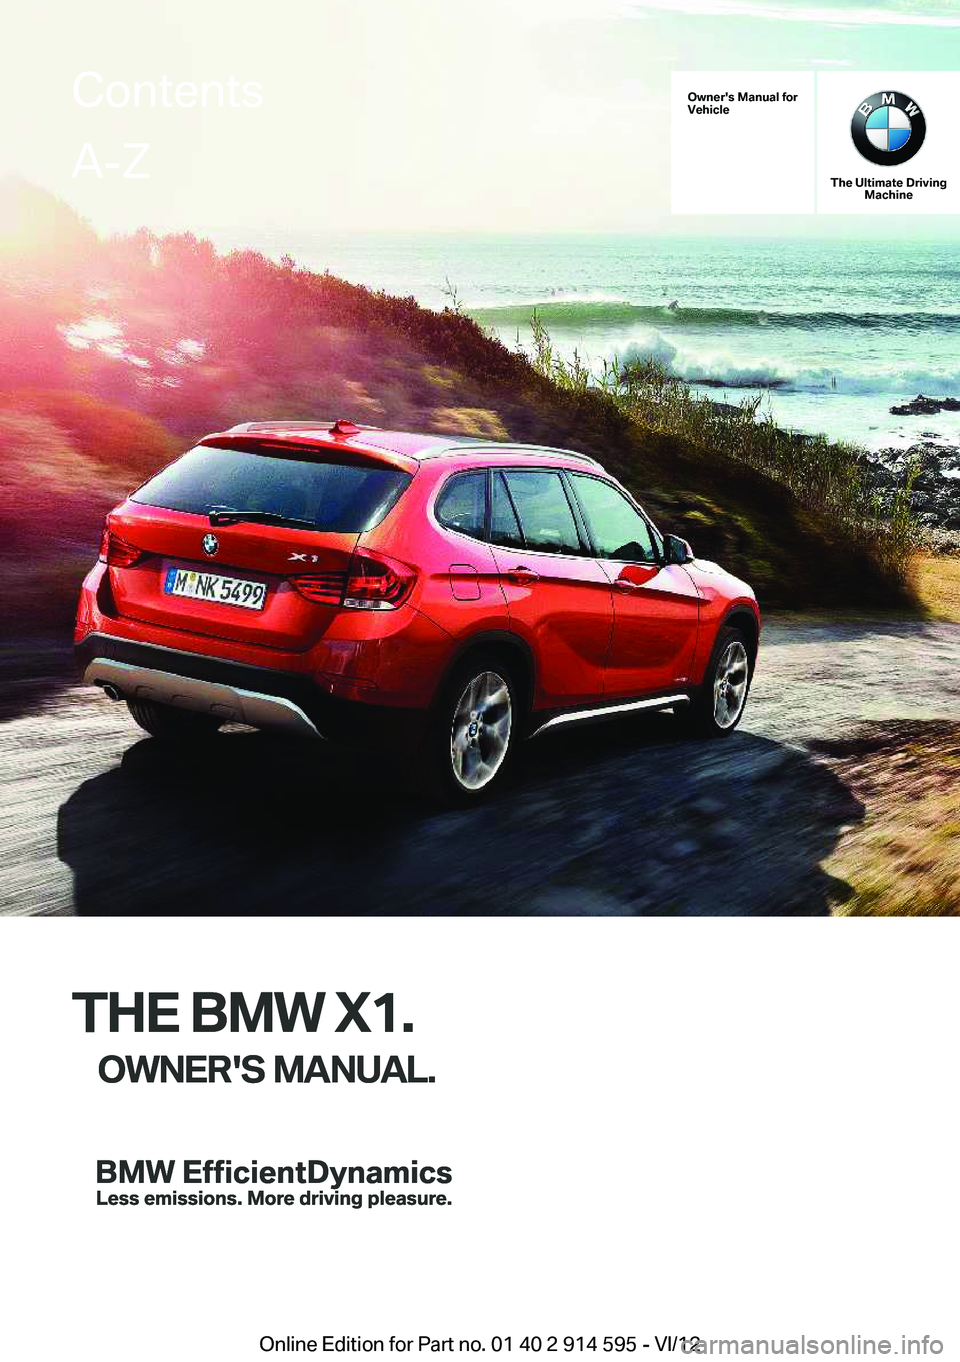 BMW X1 XDRIVE 35I 2013  Owners Manual Owner's Manual for
Vehicle
THE BMW X1.
OWNER'S MANUAL.
The Ultimate Driving Machine
THE BMW X1.
OWNER'S MANUAL.
ContentsA-Z
Online Edition for Part no. 01 40 2 914 595 - VI/12    